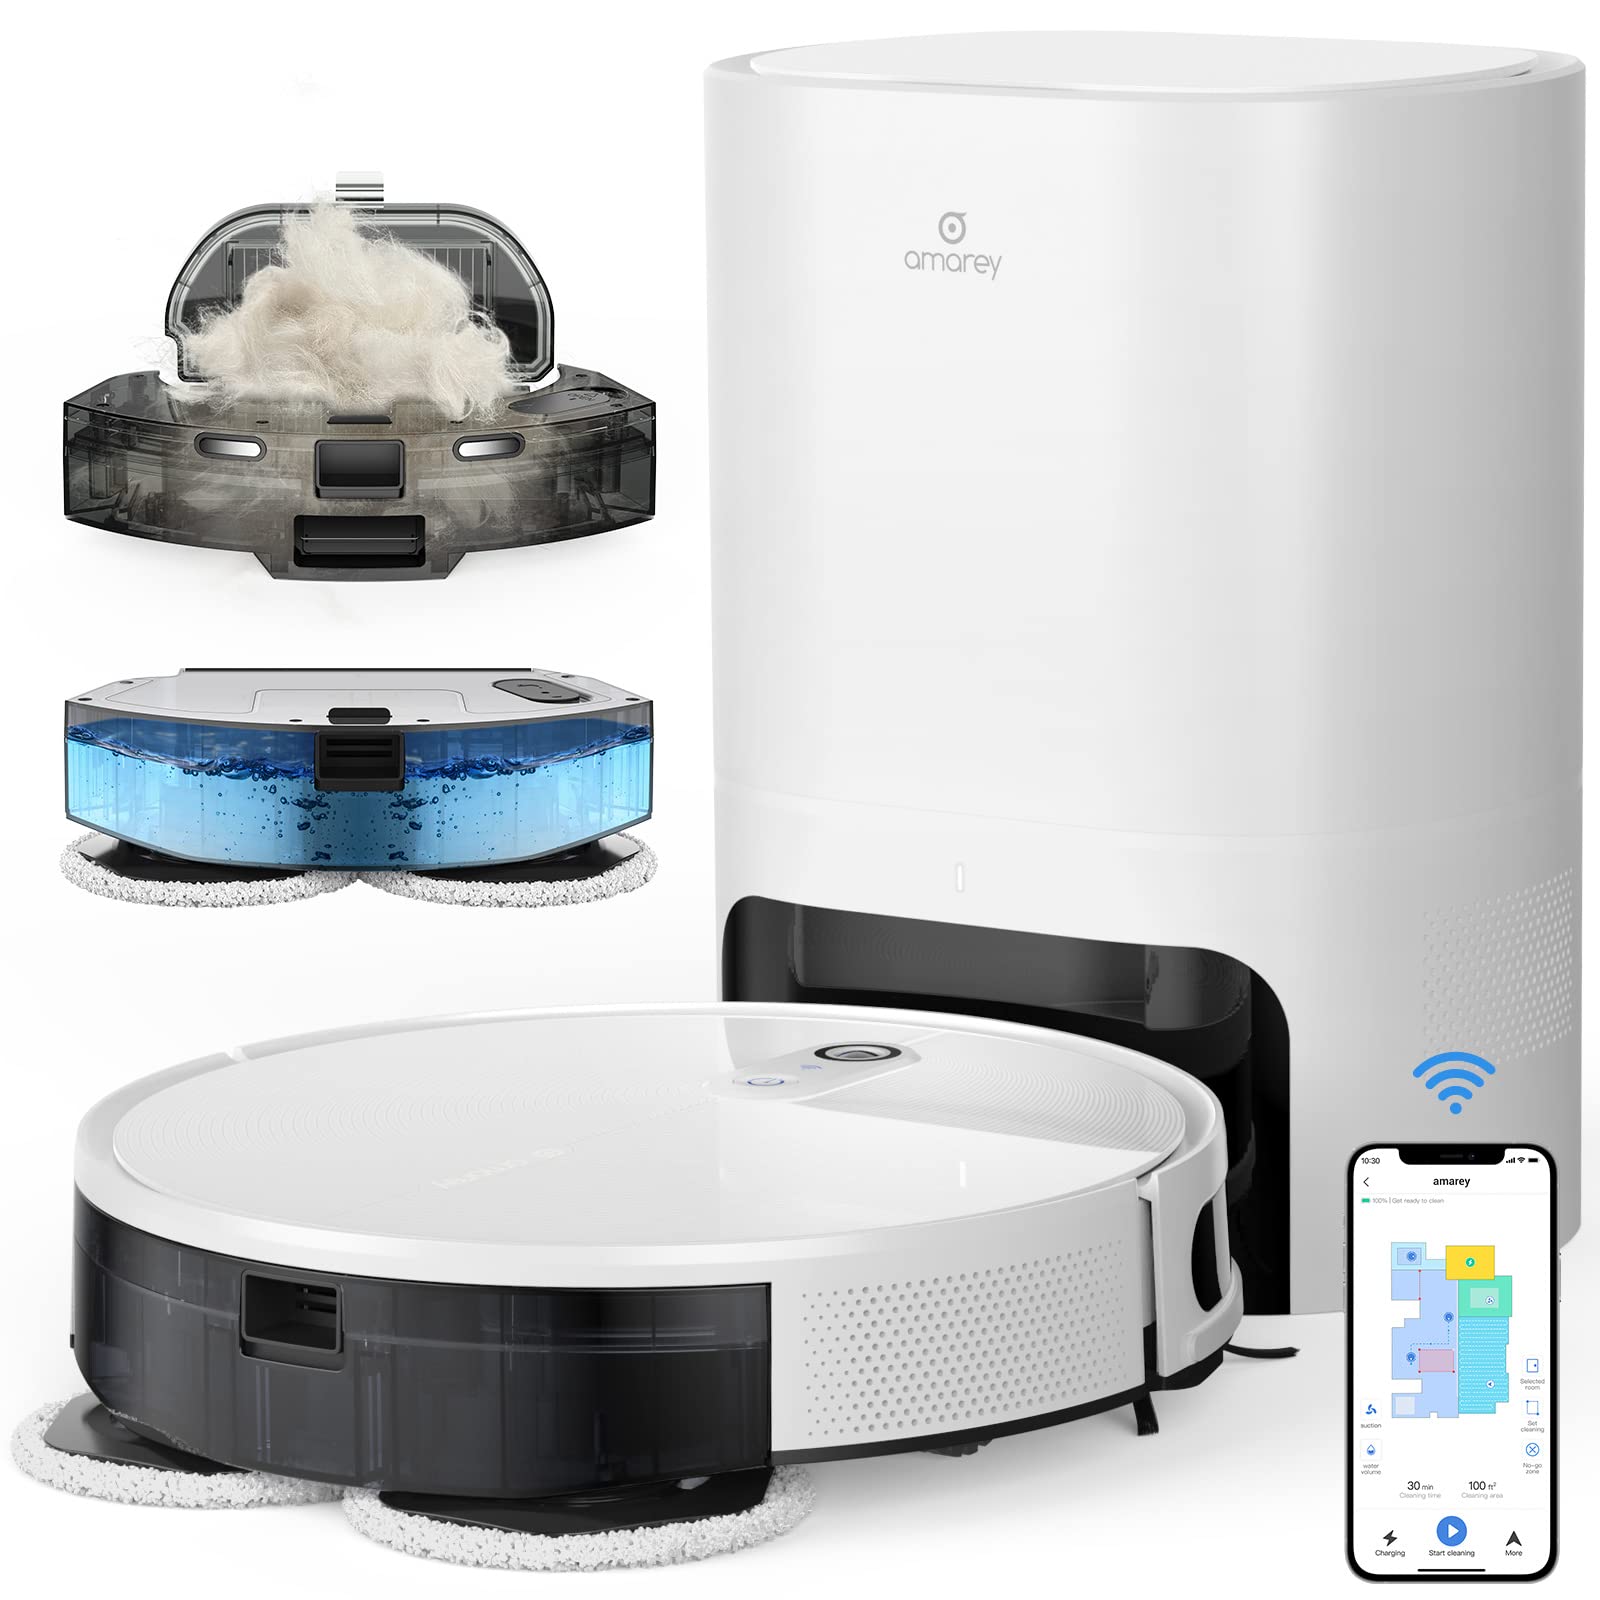 Clean your home efficiently - smart vacuum